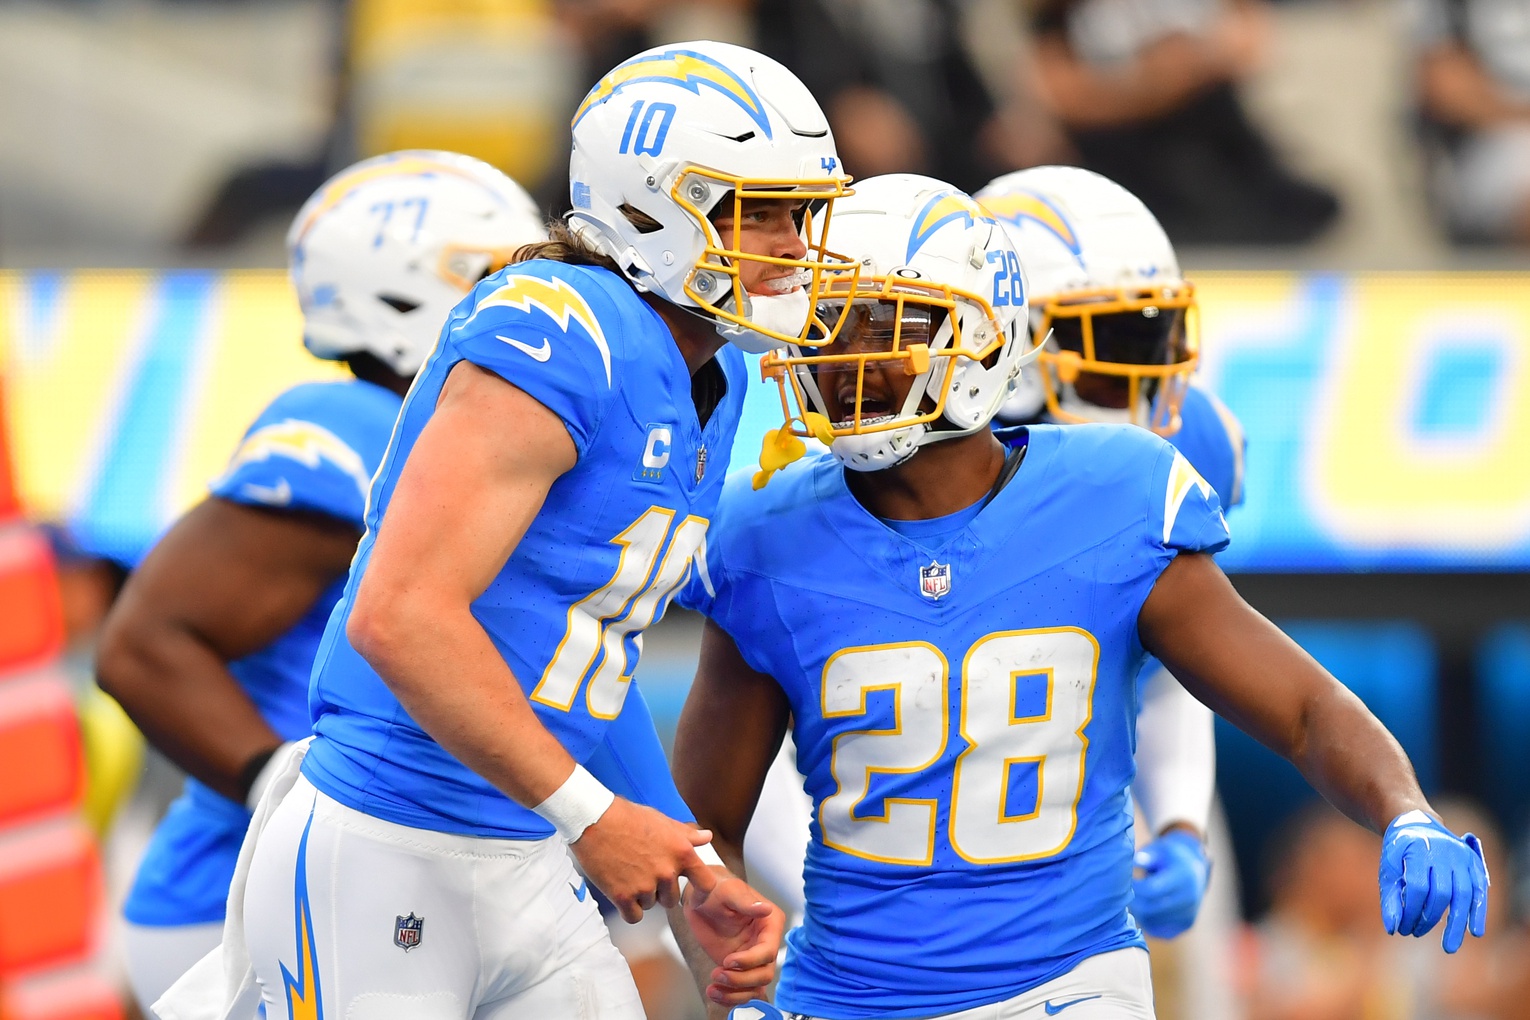 Los Angeles Chargers quarterback Justin Herbert (10) celebrates his touchdown scored against the Las Vegas Raiders with running back Isaiah Spiller (28) during the first half at SoFi Stadium. Mandatory Credit: Gary A. Vasquez-USA TODAY Sports